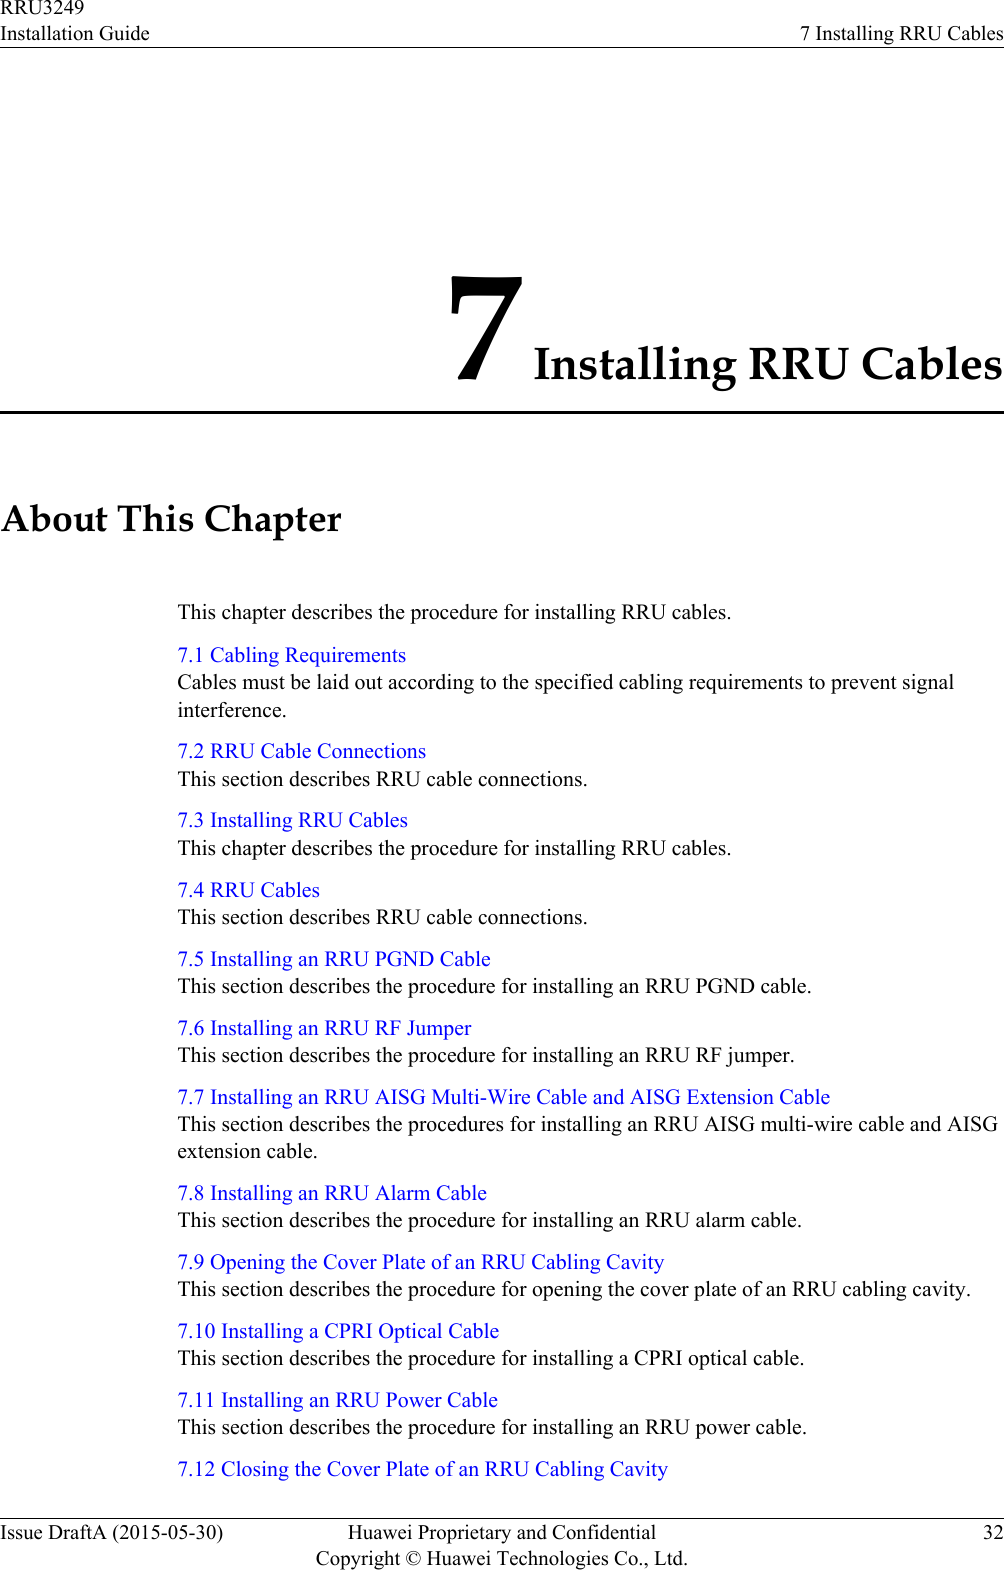 7 Installing RRU CablesAbout This ChapterThis chapter describes the procedure for installing RRU cables.7.1 Cabling RequirementsCables must be laid out according to the specified cabling requirements to prevent signalinterference.7.2 RRU Cable ConnectionsThis section describes RRU cable connections.7.3 Installing RRU CablesThis chapter describes the procedure for installing RRU cables.7.4 RRU CablesThis section describes RRU cable connections.7.5 Installing an RRU PGND CableThis section describes the procedure for installing an RRU PGND cable.7.6 Installing an RRU RF JumperThis section describes the procedure for installing an RRU RF jumper.7.7 Installing an RRU AISG Multi-Wire Cable and AISG Extension CableThis section describes the procedures for installing an RRU AISG multi-wire cable and AISGextension cable.7.8 Installing an RRU Alarm CableThis section describes the procedure for installing an RRU alarm cable.7.9 Opening the Cover Plate of an RRU Cabling CavityThis section describes the procedure for opening the cover plate of an RRU cabling cavity.7.10 Installing a CPRI Optical CableThis section describes the procedure for installing a CPRI optical cable.7.11 Installing an RRU Power CableThis section describes the procedure for installing an RRU power cable.7.12 Closing the Cover Plate of an RRU Cabling CavityRRU3249Installation Guide 7 Installing RRU CablesIssue DraftA (2015-05-30) Huawei Proprietary and ConfidentialCopyright © Huawei Technologies Co., Ltd.32